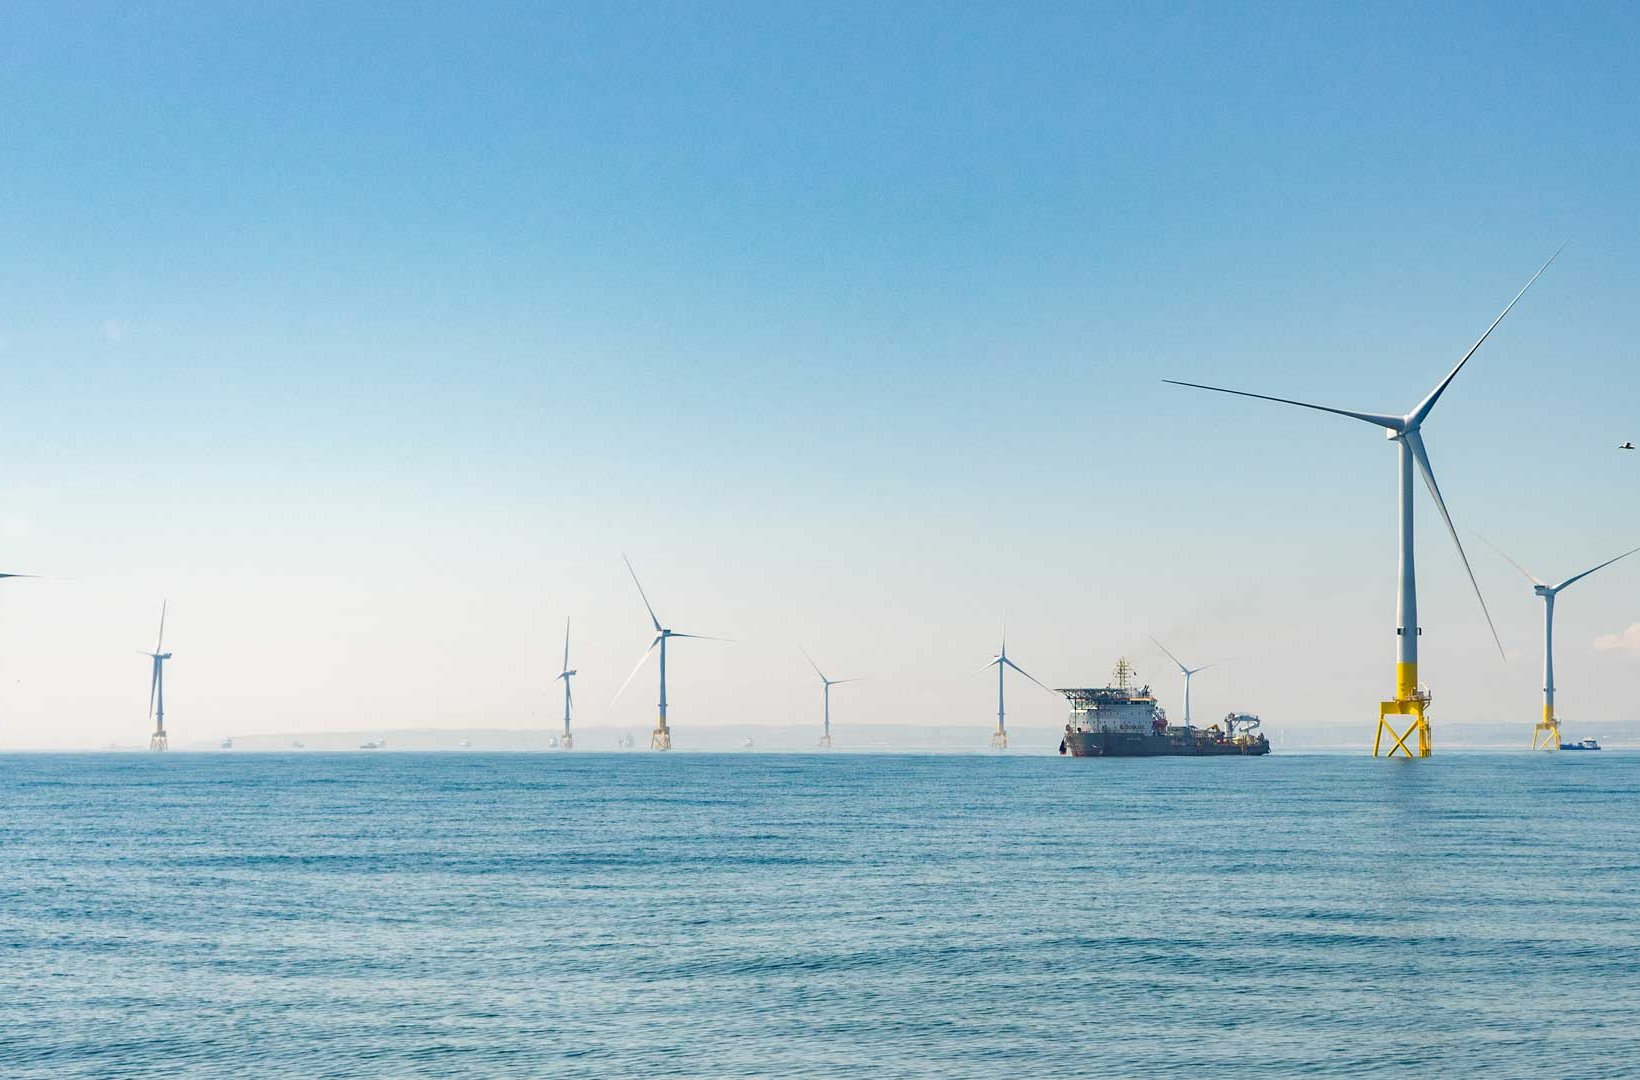 The European Offshore Wind Deployment Centre in Scotland’s North-east